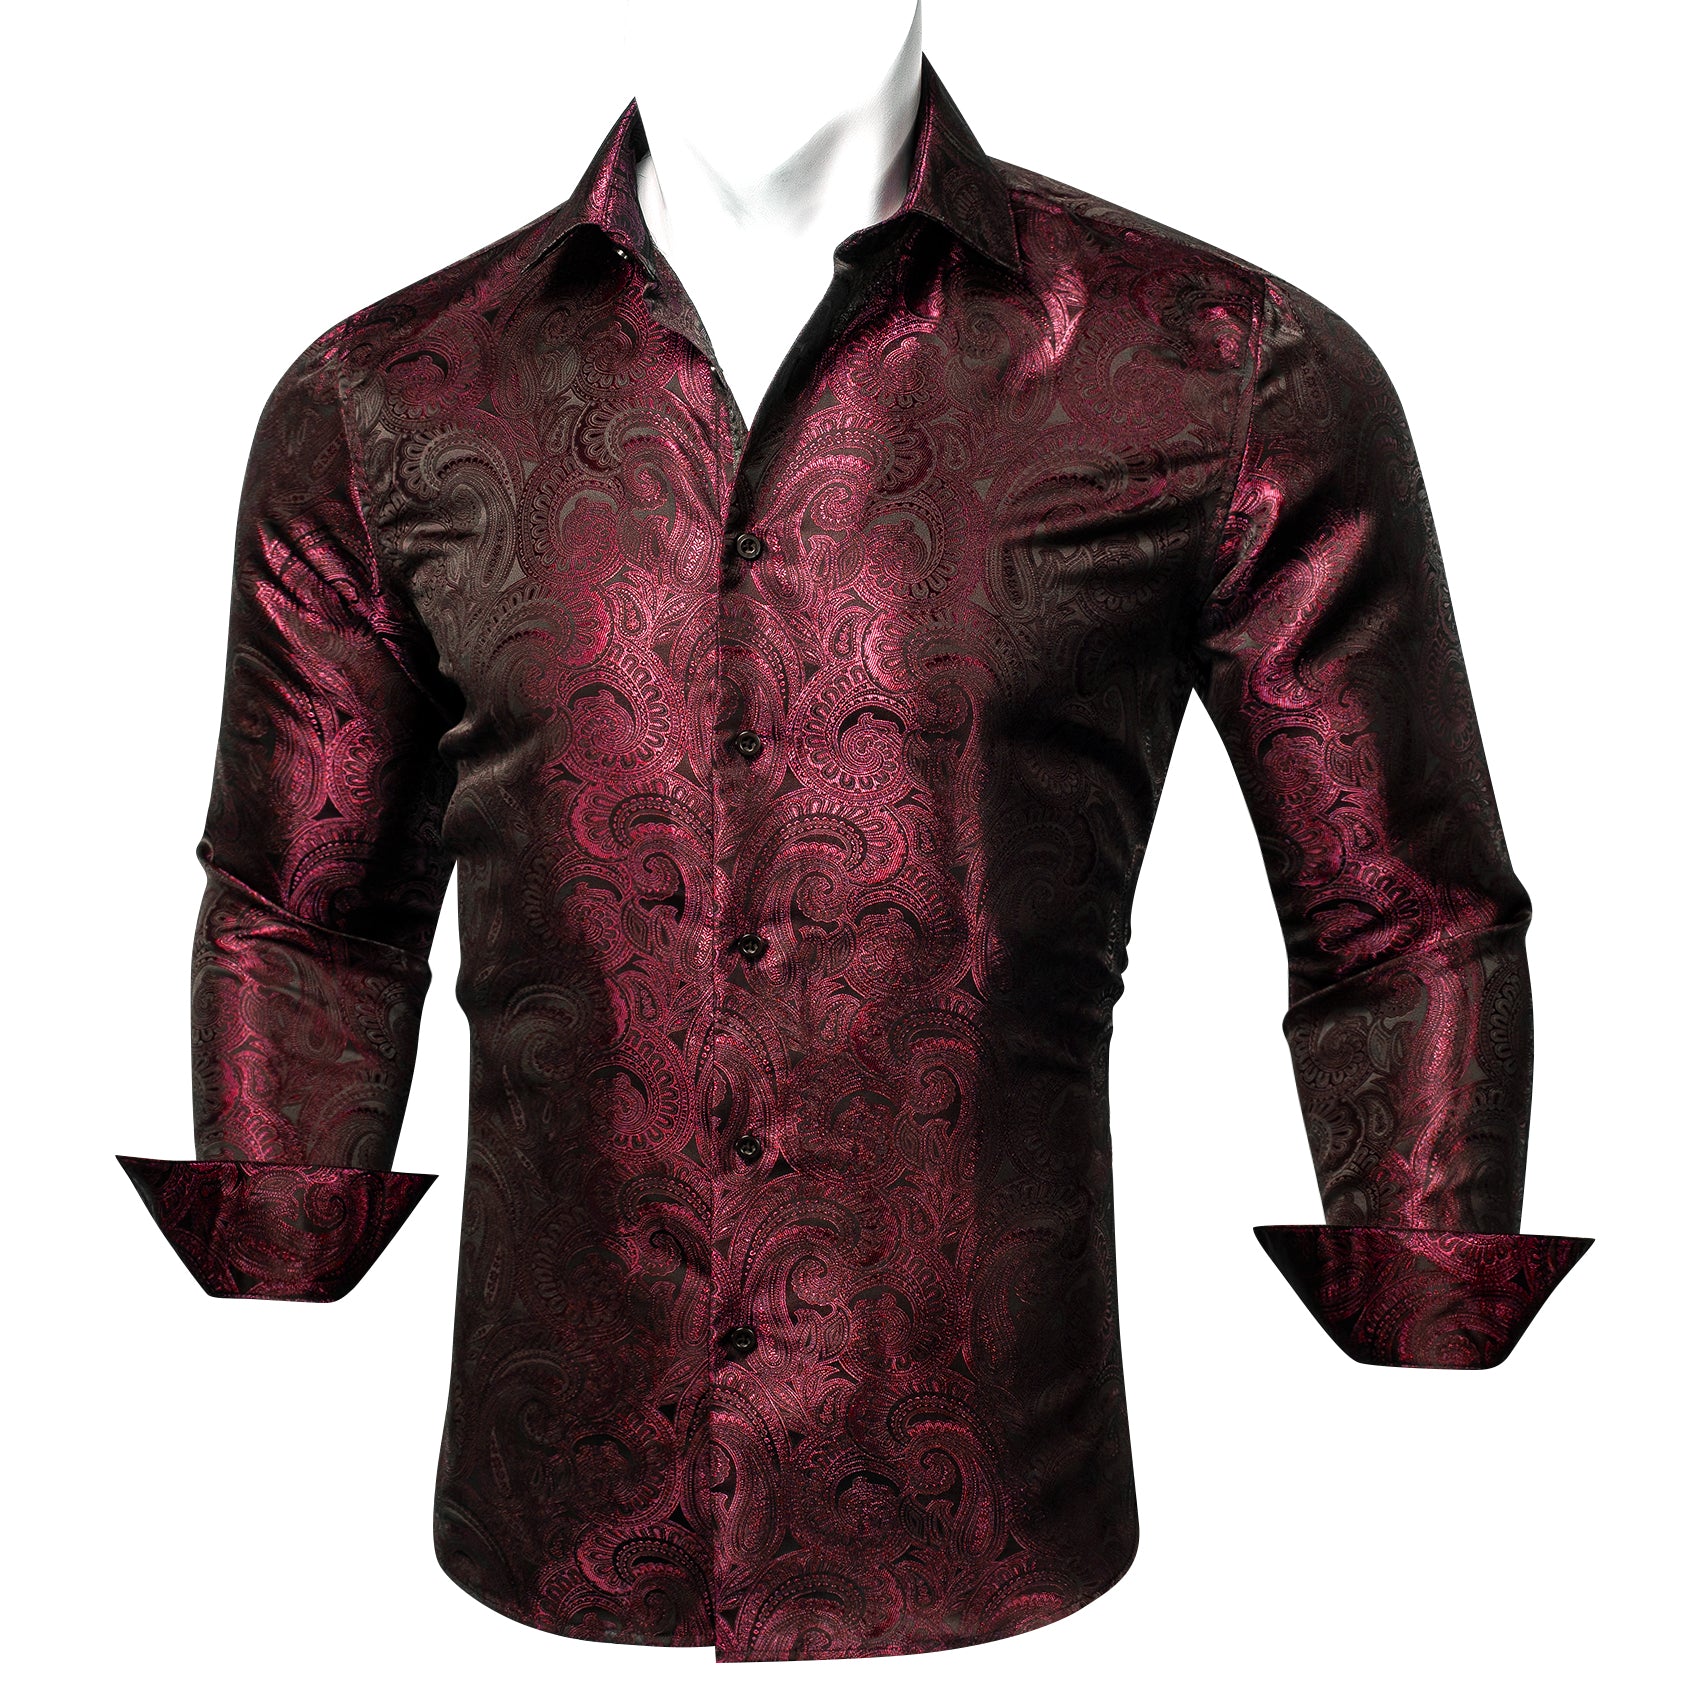 cool button up shirts mens